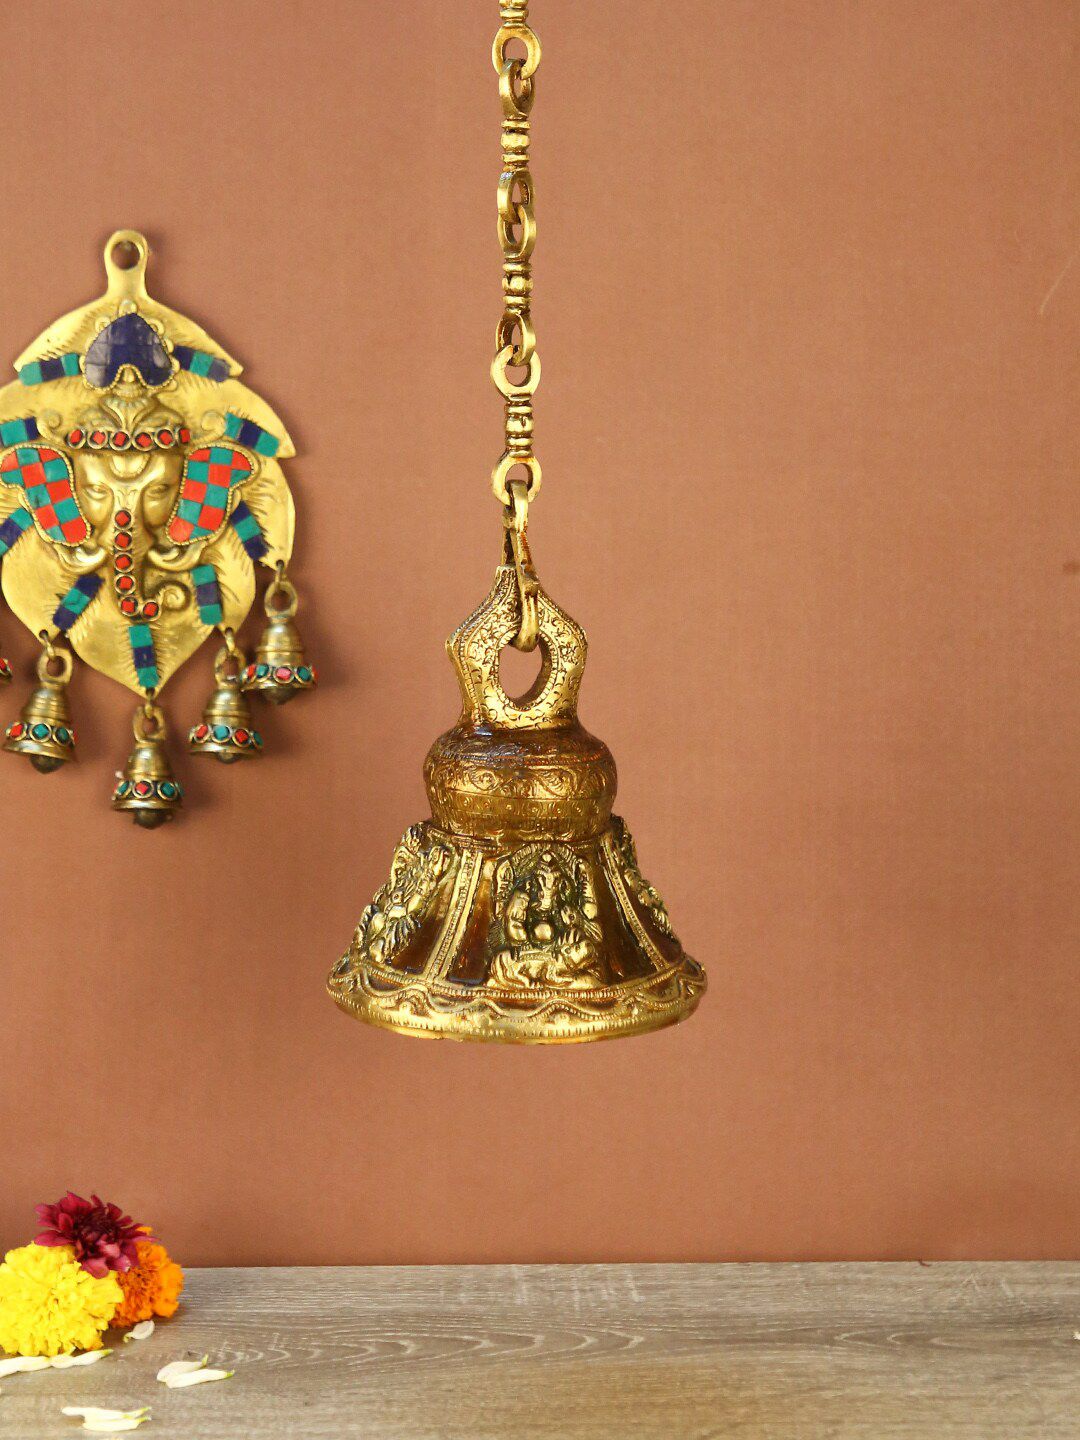 Aapno Rajasthan Brown & Gold-Toned Brass Lord Ganesh Handcrafted Hanging Antique Bell Price in India